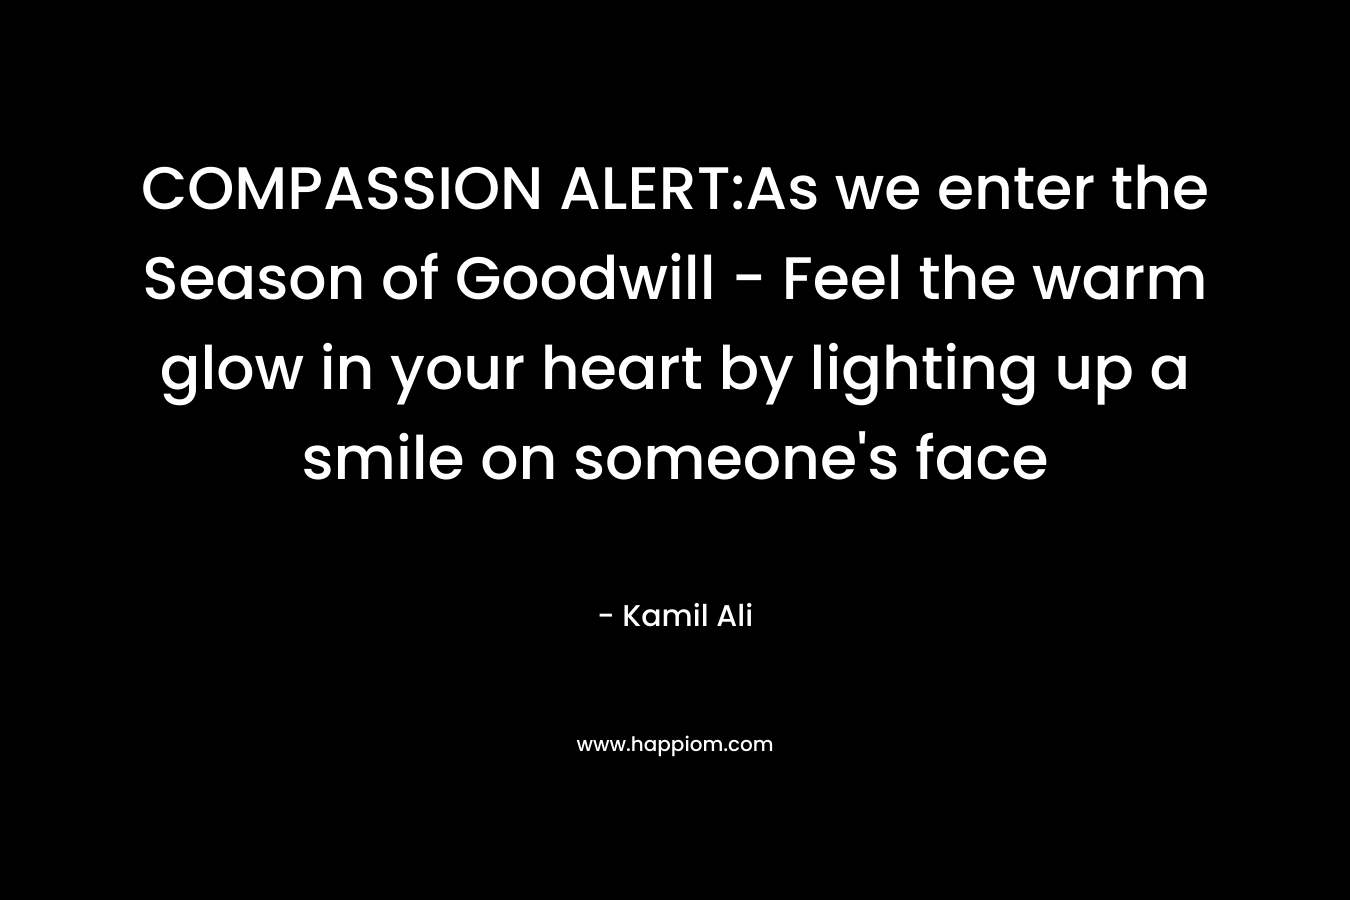 COMPASSION ALERT:As we enter the Season of Goodwill - Feel the warm glow in your heart by lighting up a smile on someone's face